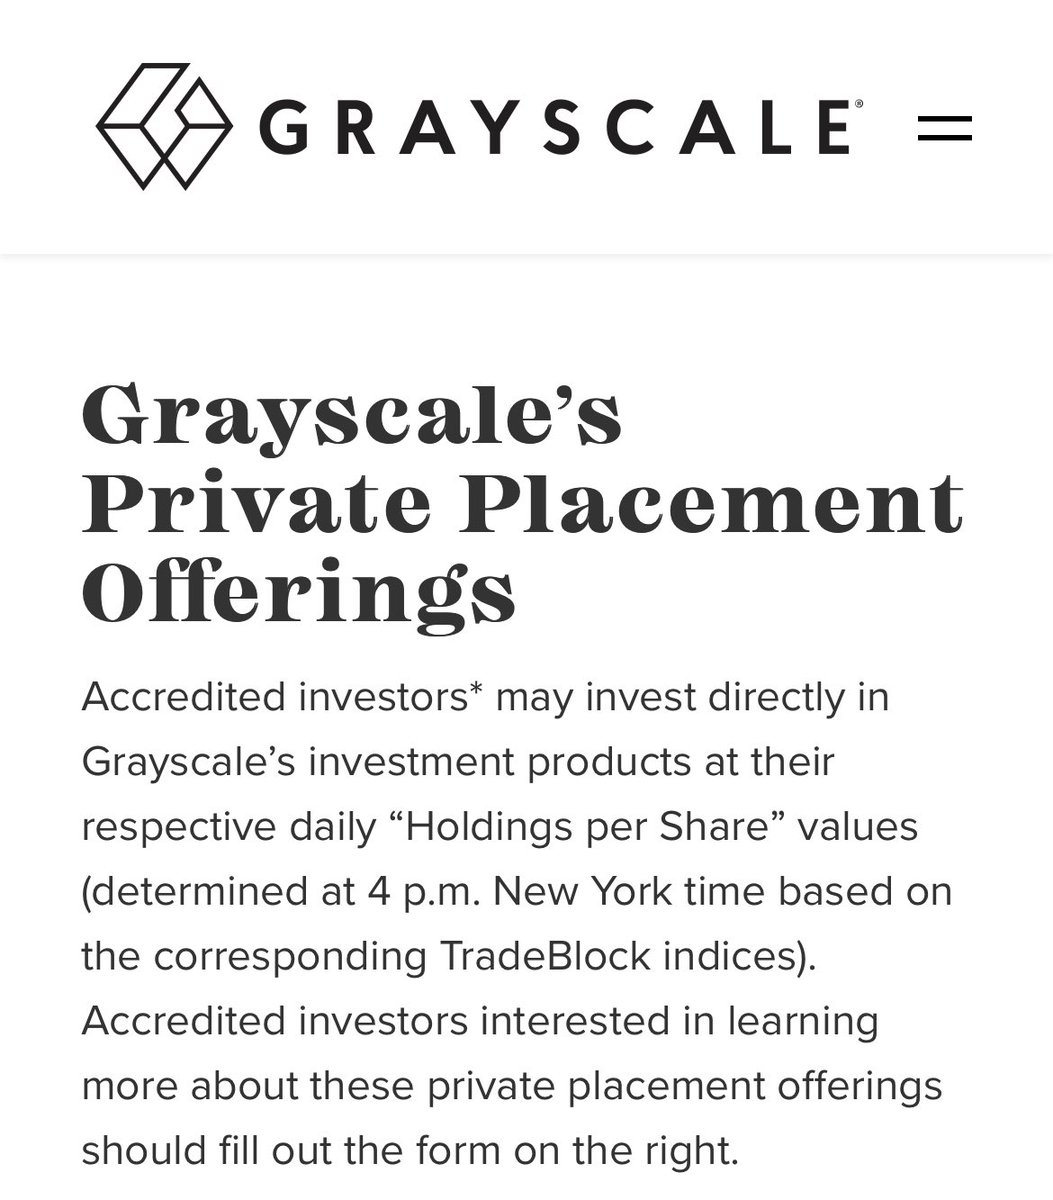 Why is there a premium? Accredited investors can contribute cash and if I’m not mistaken, “in kind” assets (Ethereum) to purchase shares at 0% premium. Also know as NAV (net asset value). After 6 months they can sell them on the market.6/x